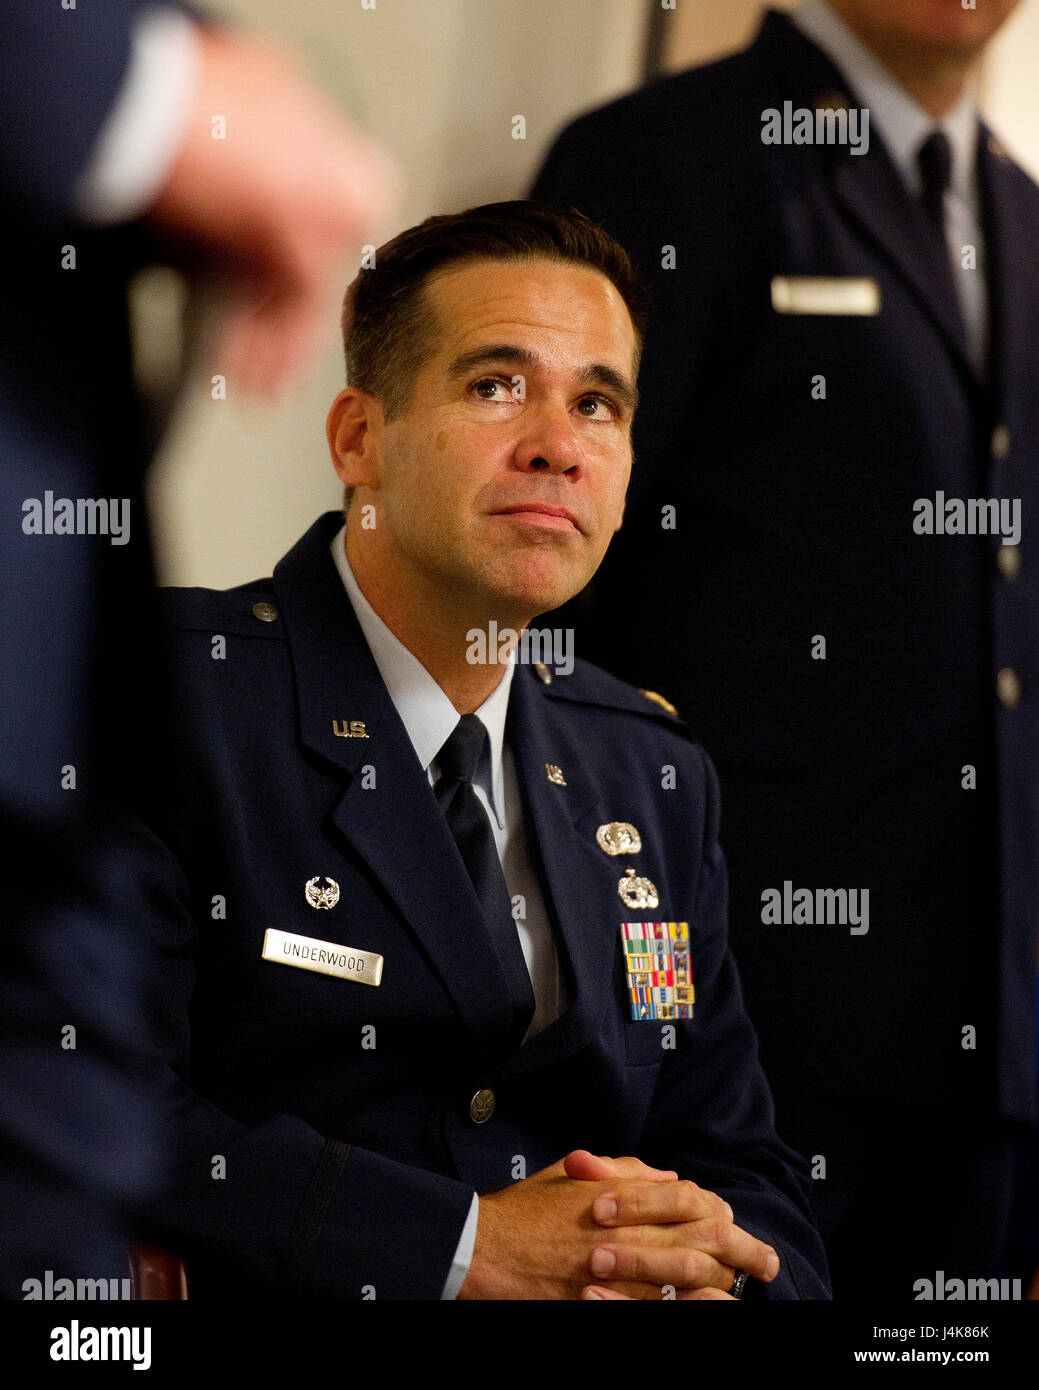 U.S. Air Force Maj. Hamilton Underwood listens to opening remarks given by U.S. Air Force Lt. Col. John Robinson, commander of the 315th Operations Group, before he assumes command of the newly activated 4th Combat Camera Squadron at Joint Base Charleston, South Carolina, May 5, 2017. The 4th CTCS was reactivated in South Carolina after being deactivated August 2015 in California. (U.S. Air Force photo by Tech. Sgt. Stephen D. Schester) Stock Photo